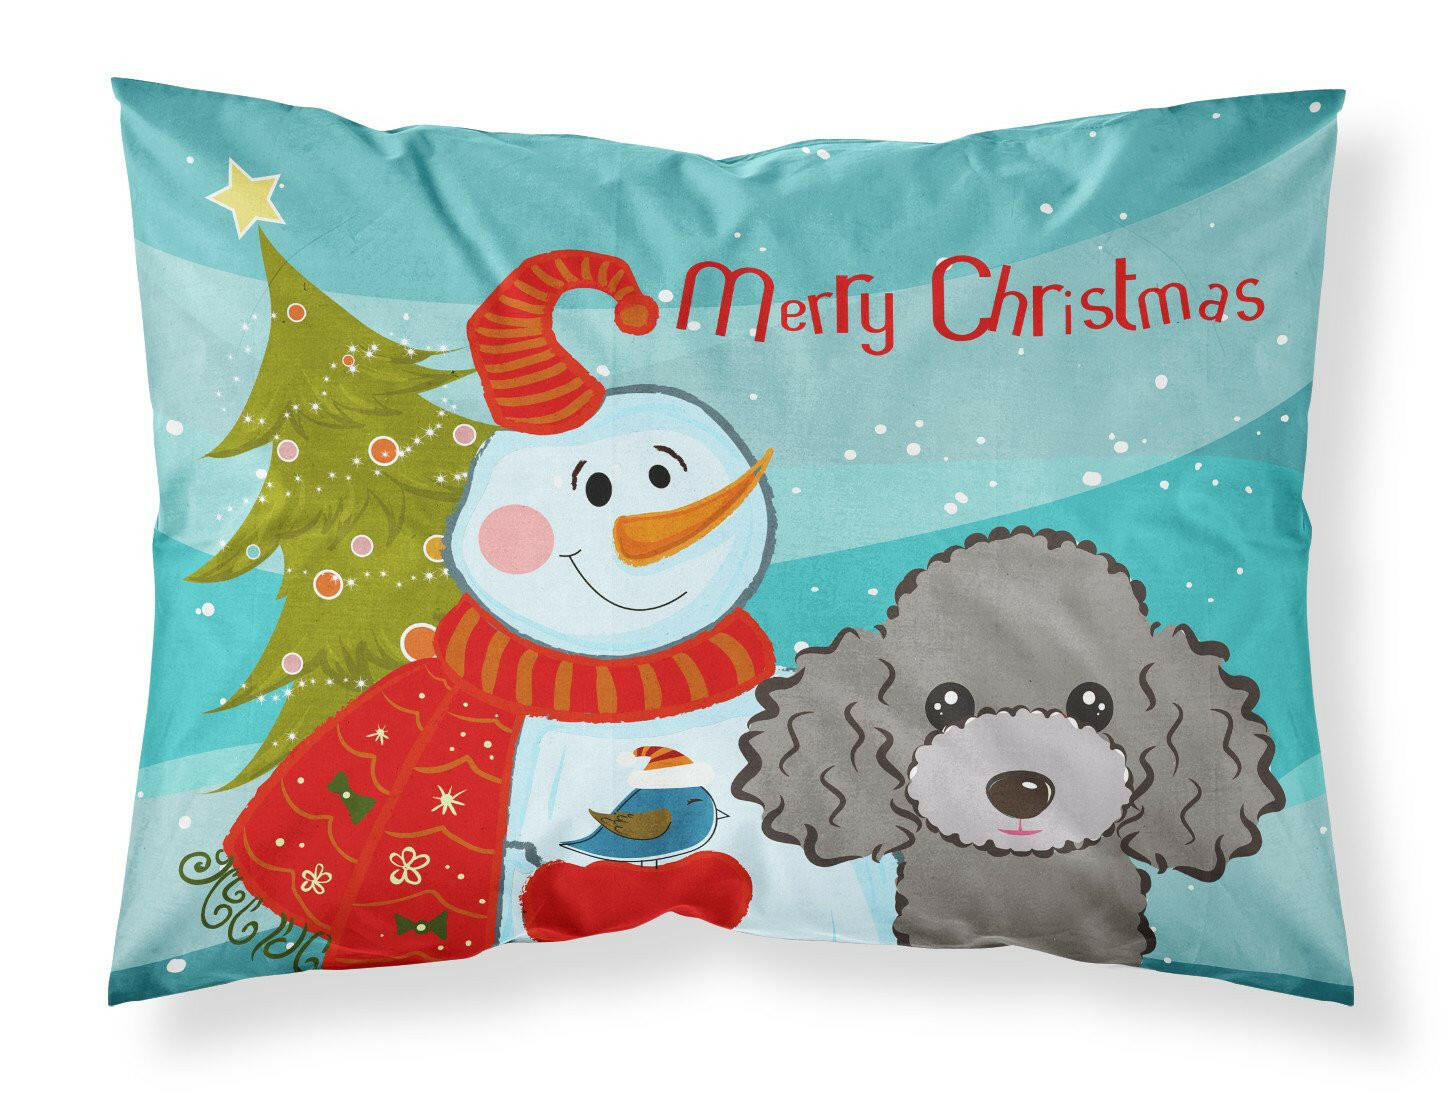 Snowman with Silver Gray Poodle Fabric Standard Pillowcase BB1879PILLOWCASE by Caroline's Treasures